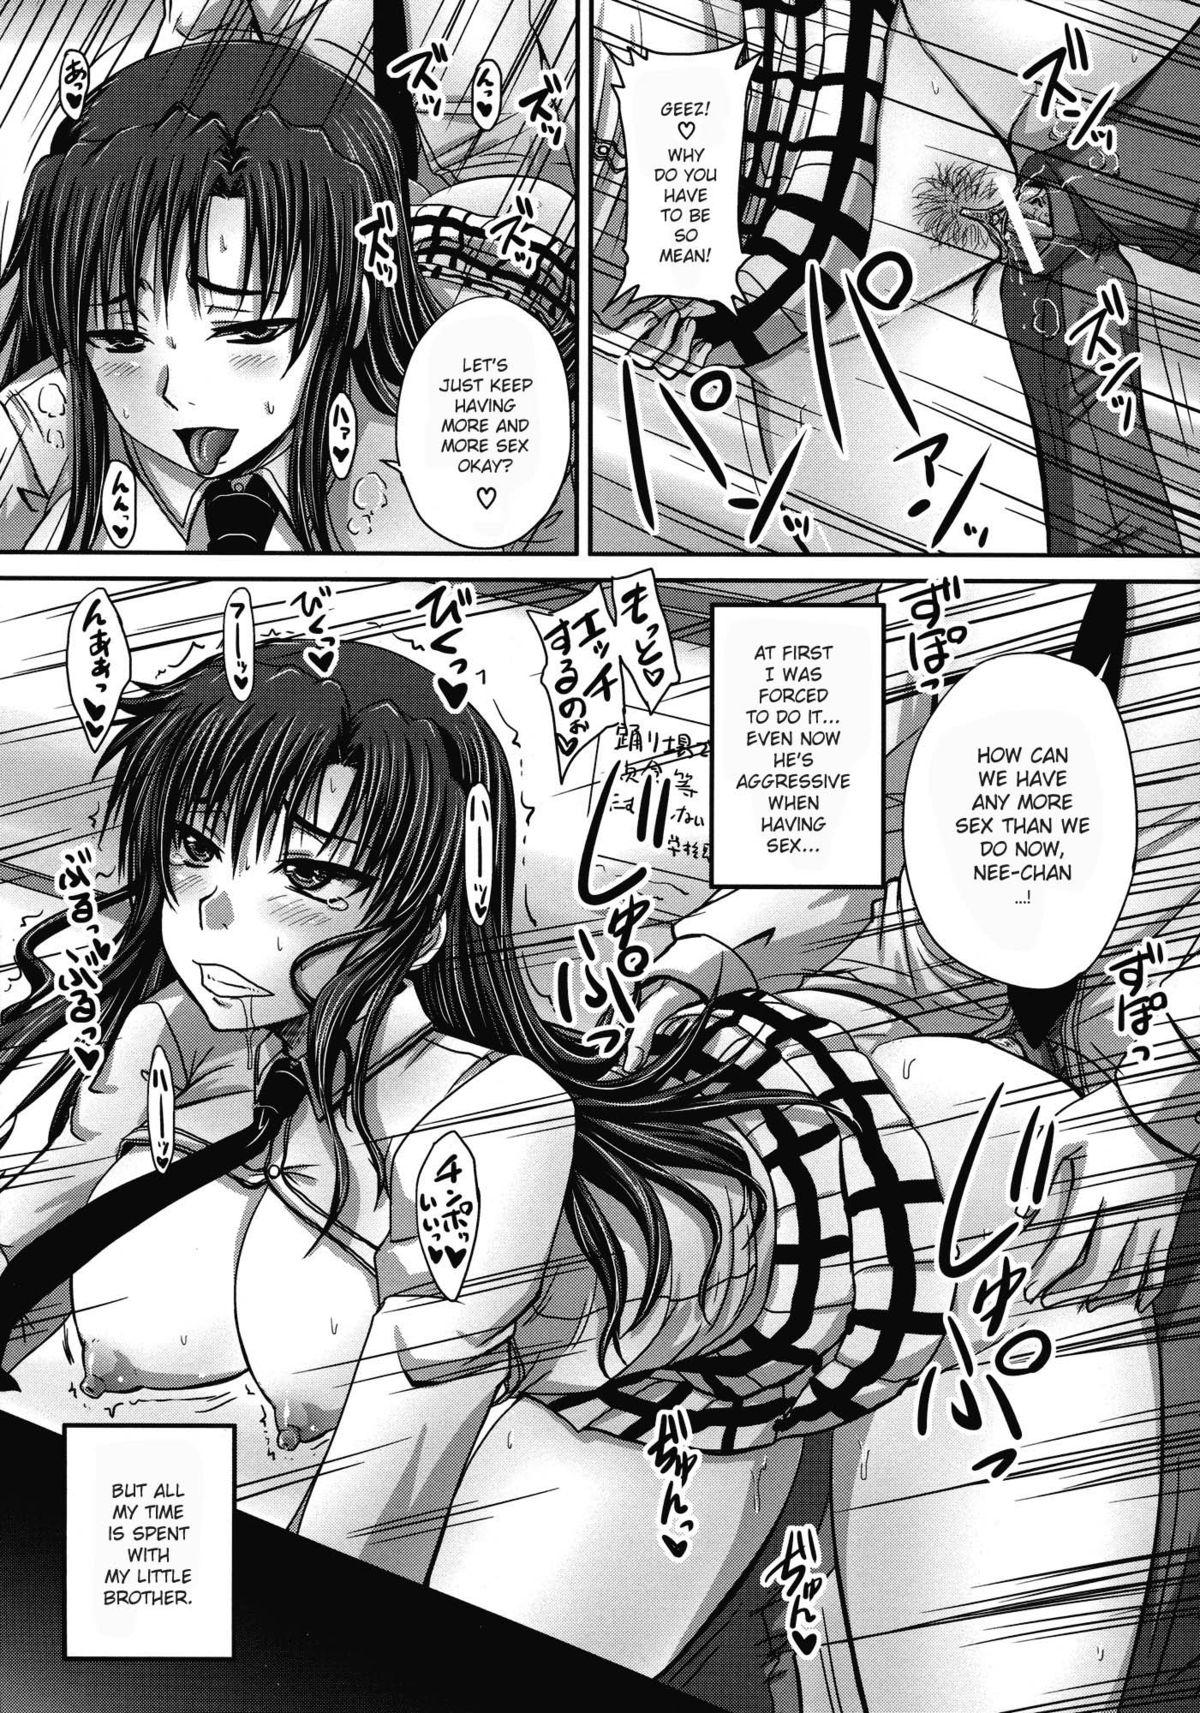 [Akigami Satoru] Tsukurou! Onaho Ane - Let's made a Sex Sleeve from Sister Ch. 1-2 [English] [snowshoes] 50